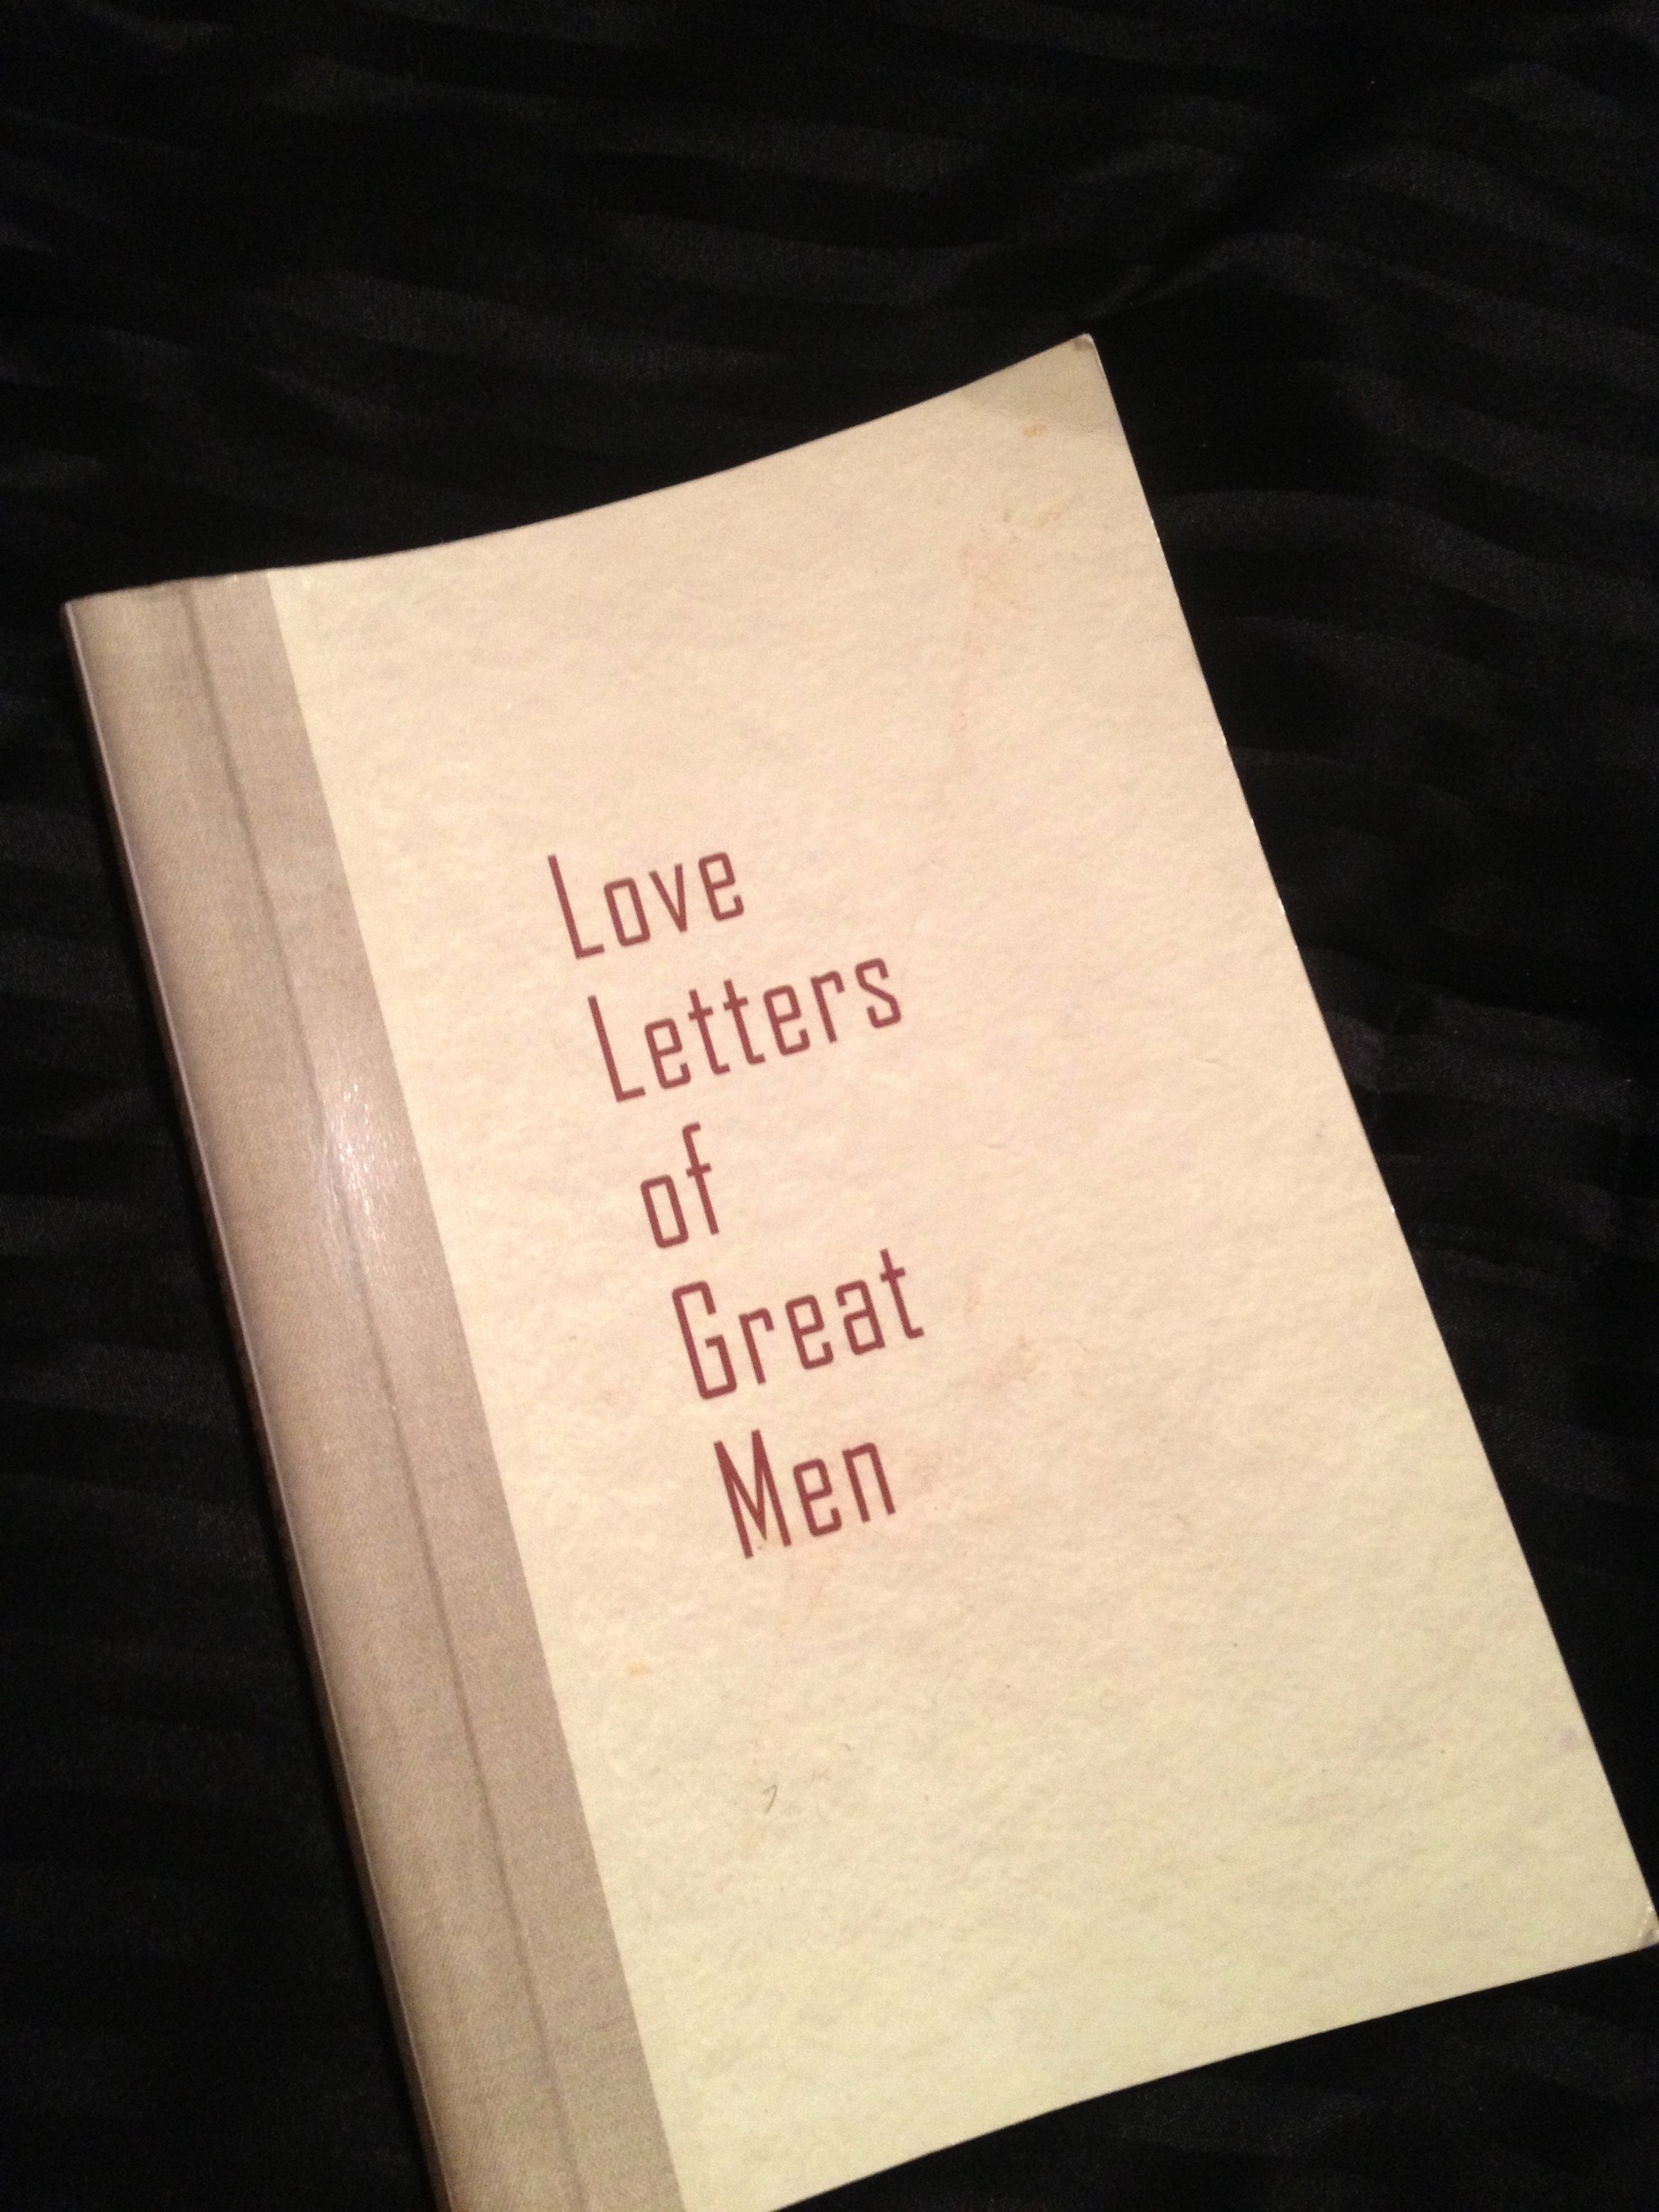 Love Letter by Great Men Awesome Love Letters